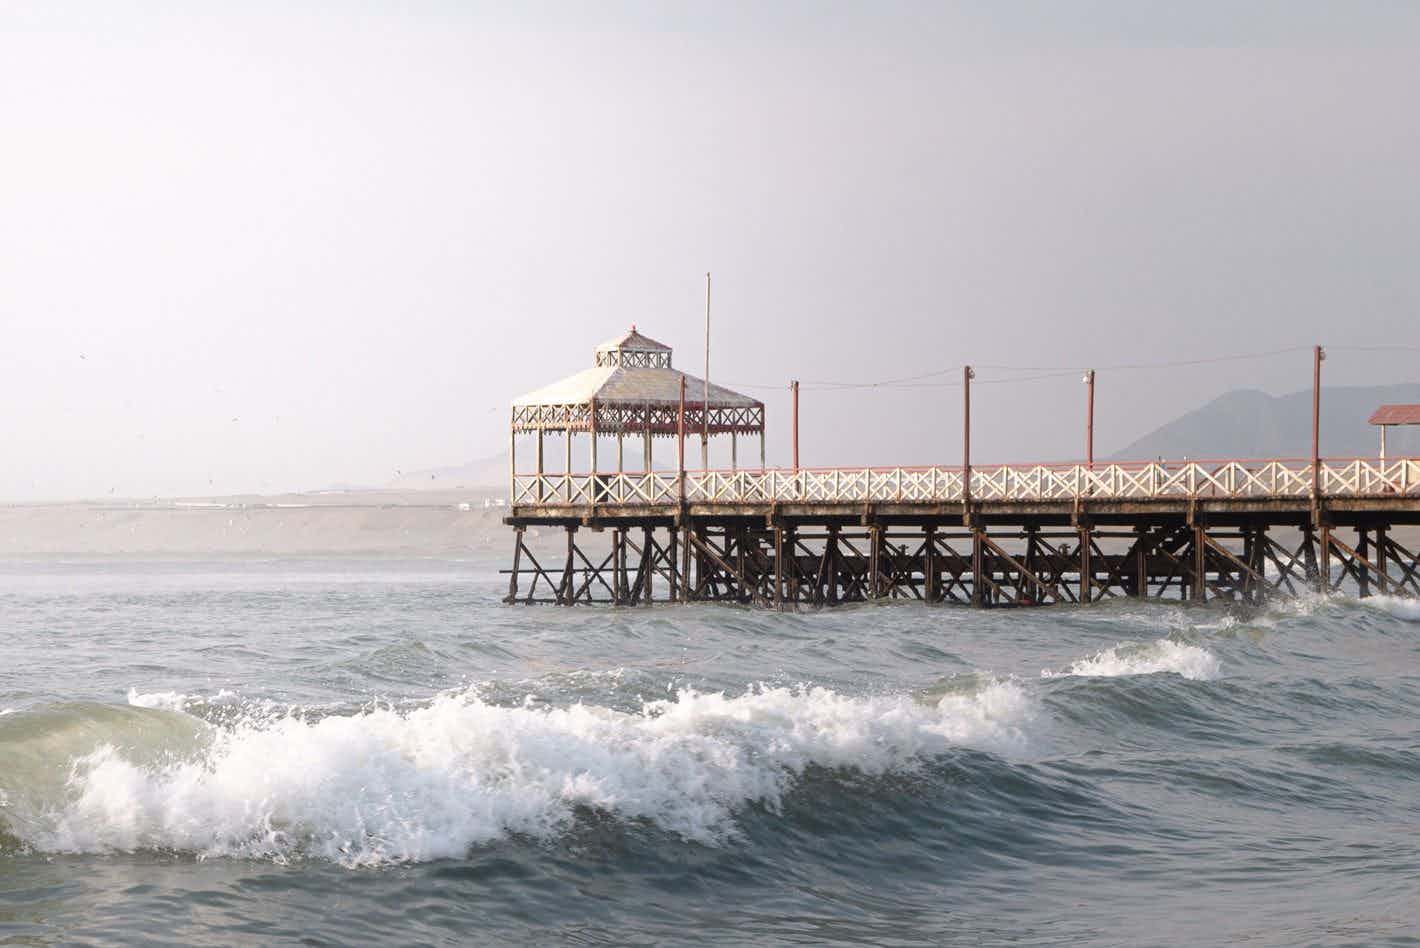 the pier and the waves